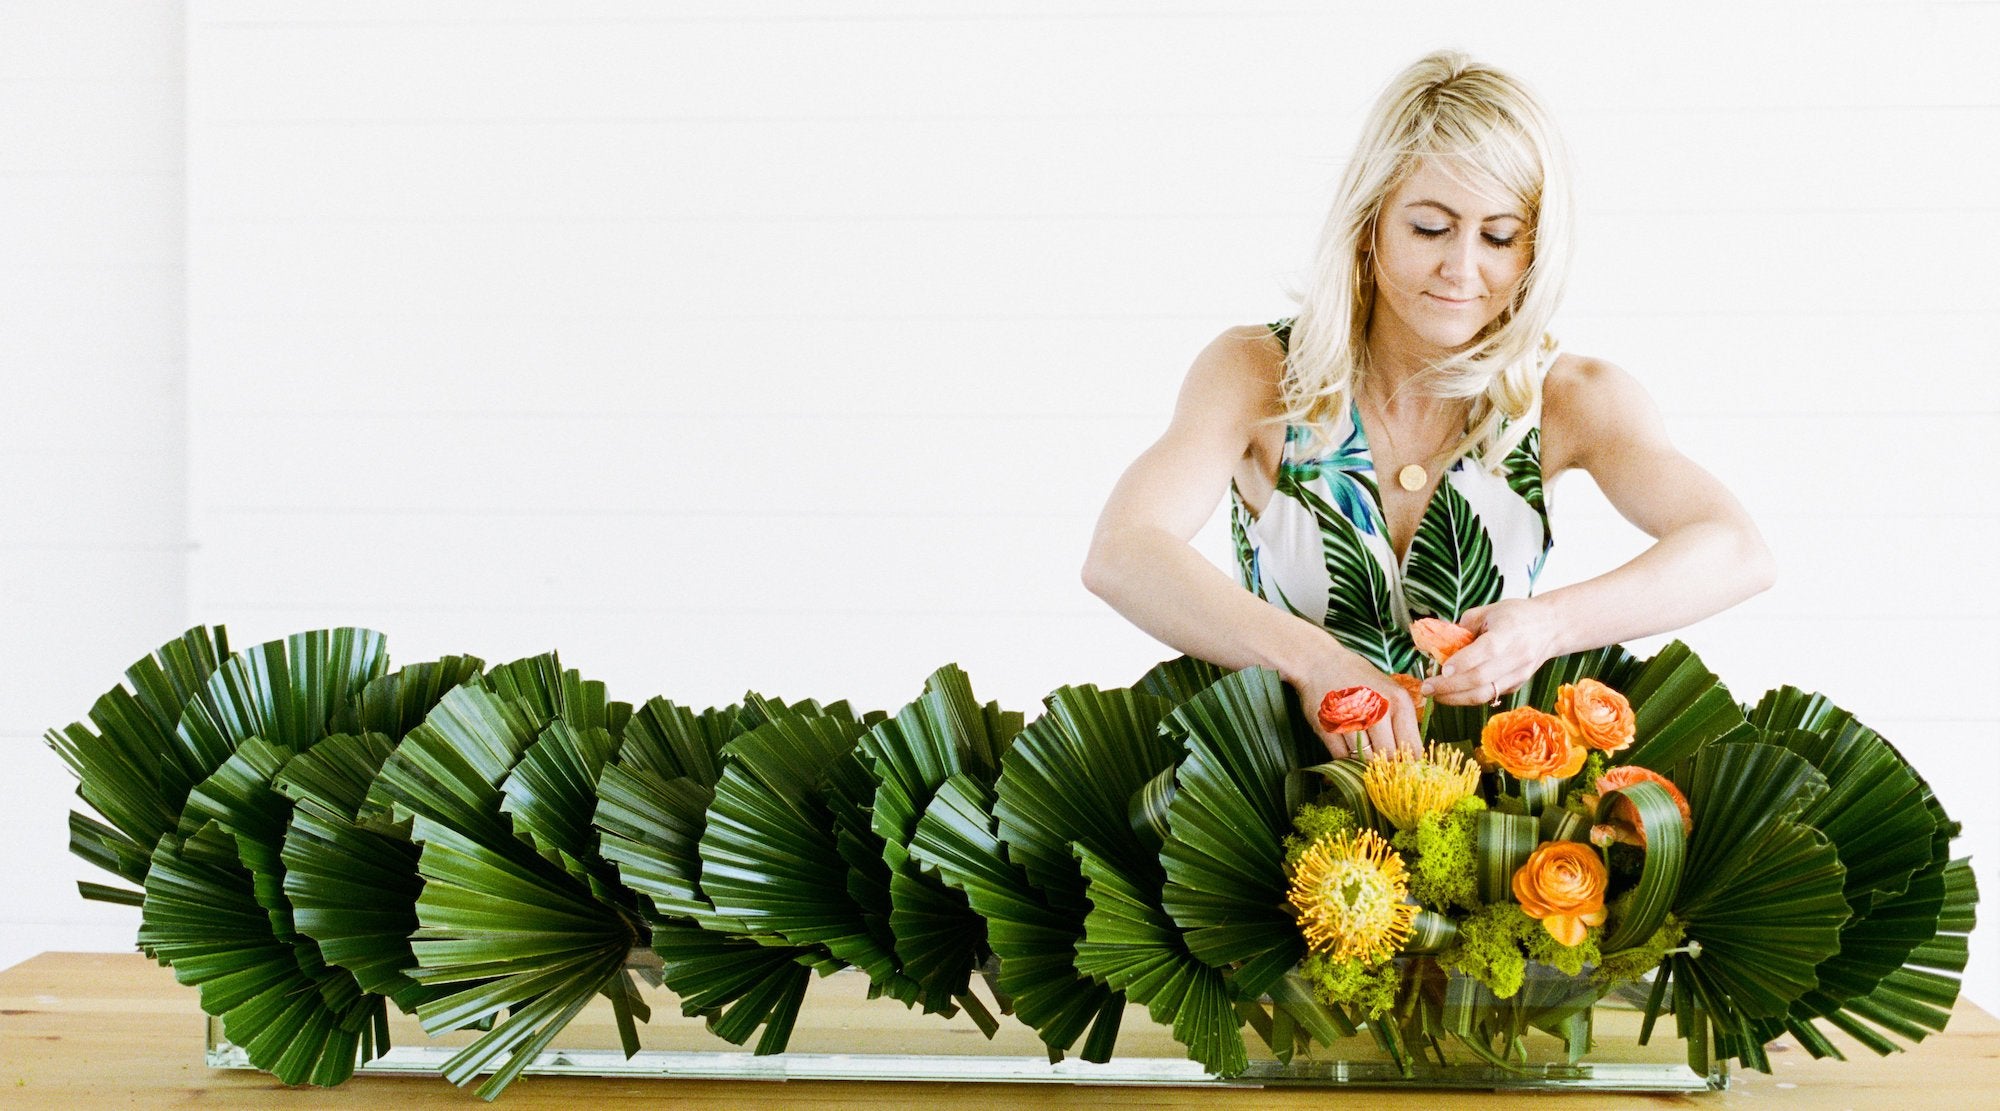 Floral Arranging as Art & Therapy